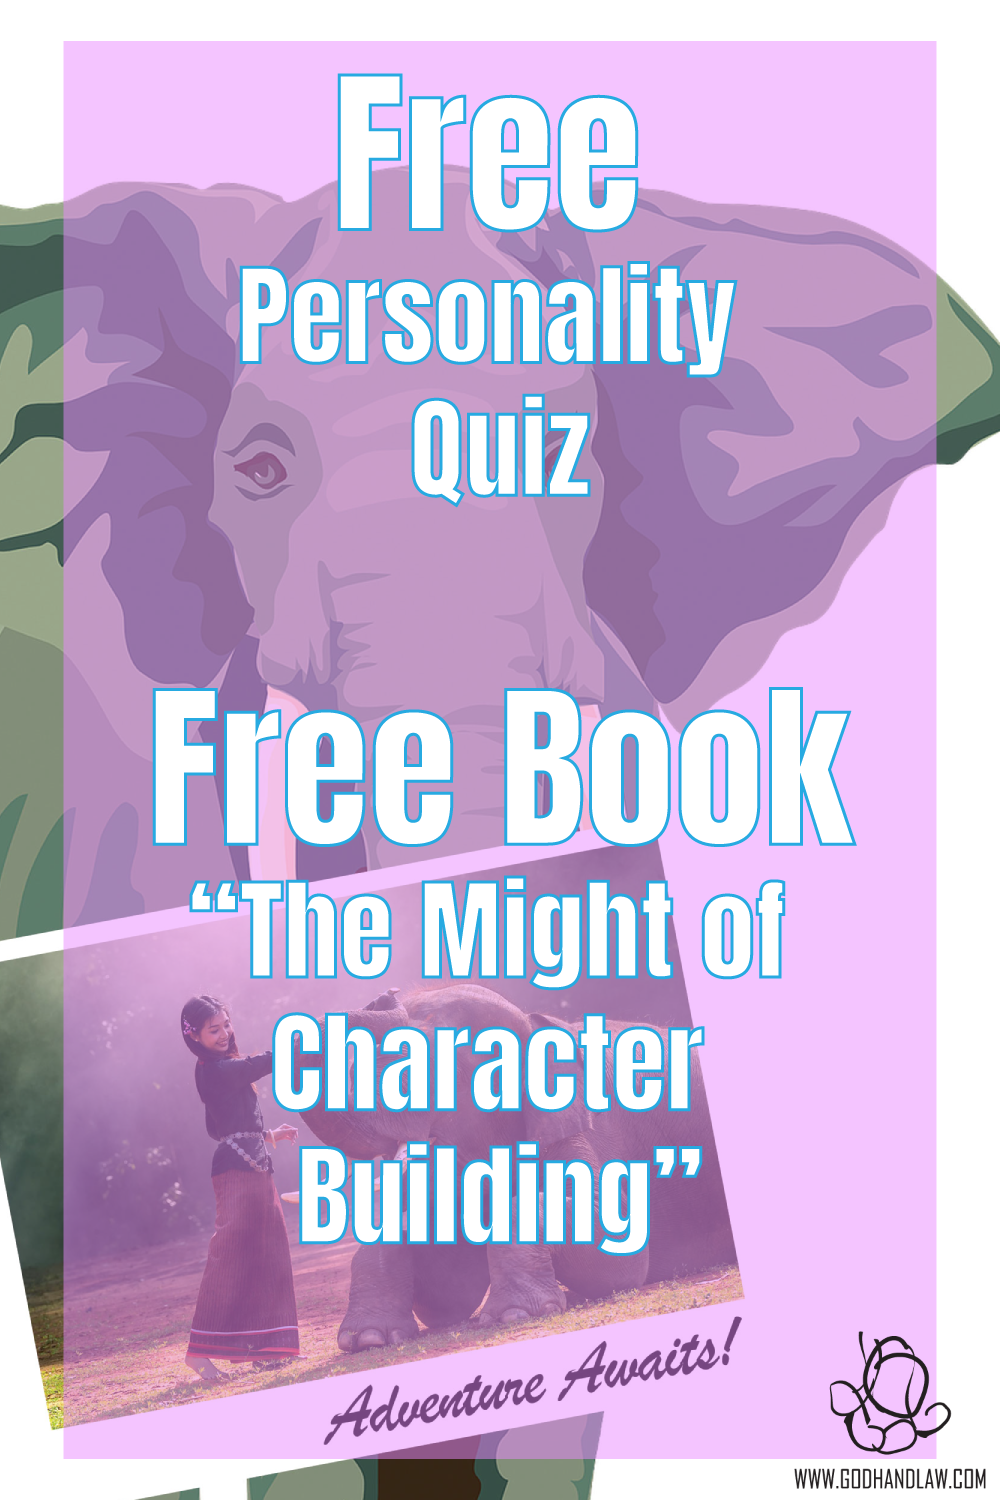 Here you can find out which of the 12 archetypes you are. This Free personality quiz will show you how to develop for personal growth, or with friends as you help each other grow, just goal you can set for you and your Millennials friends